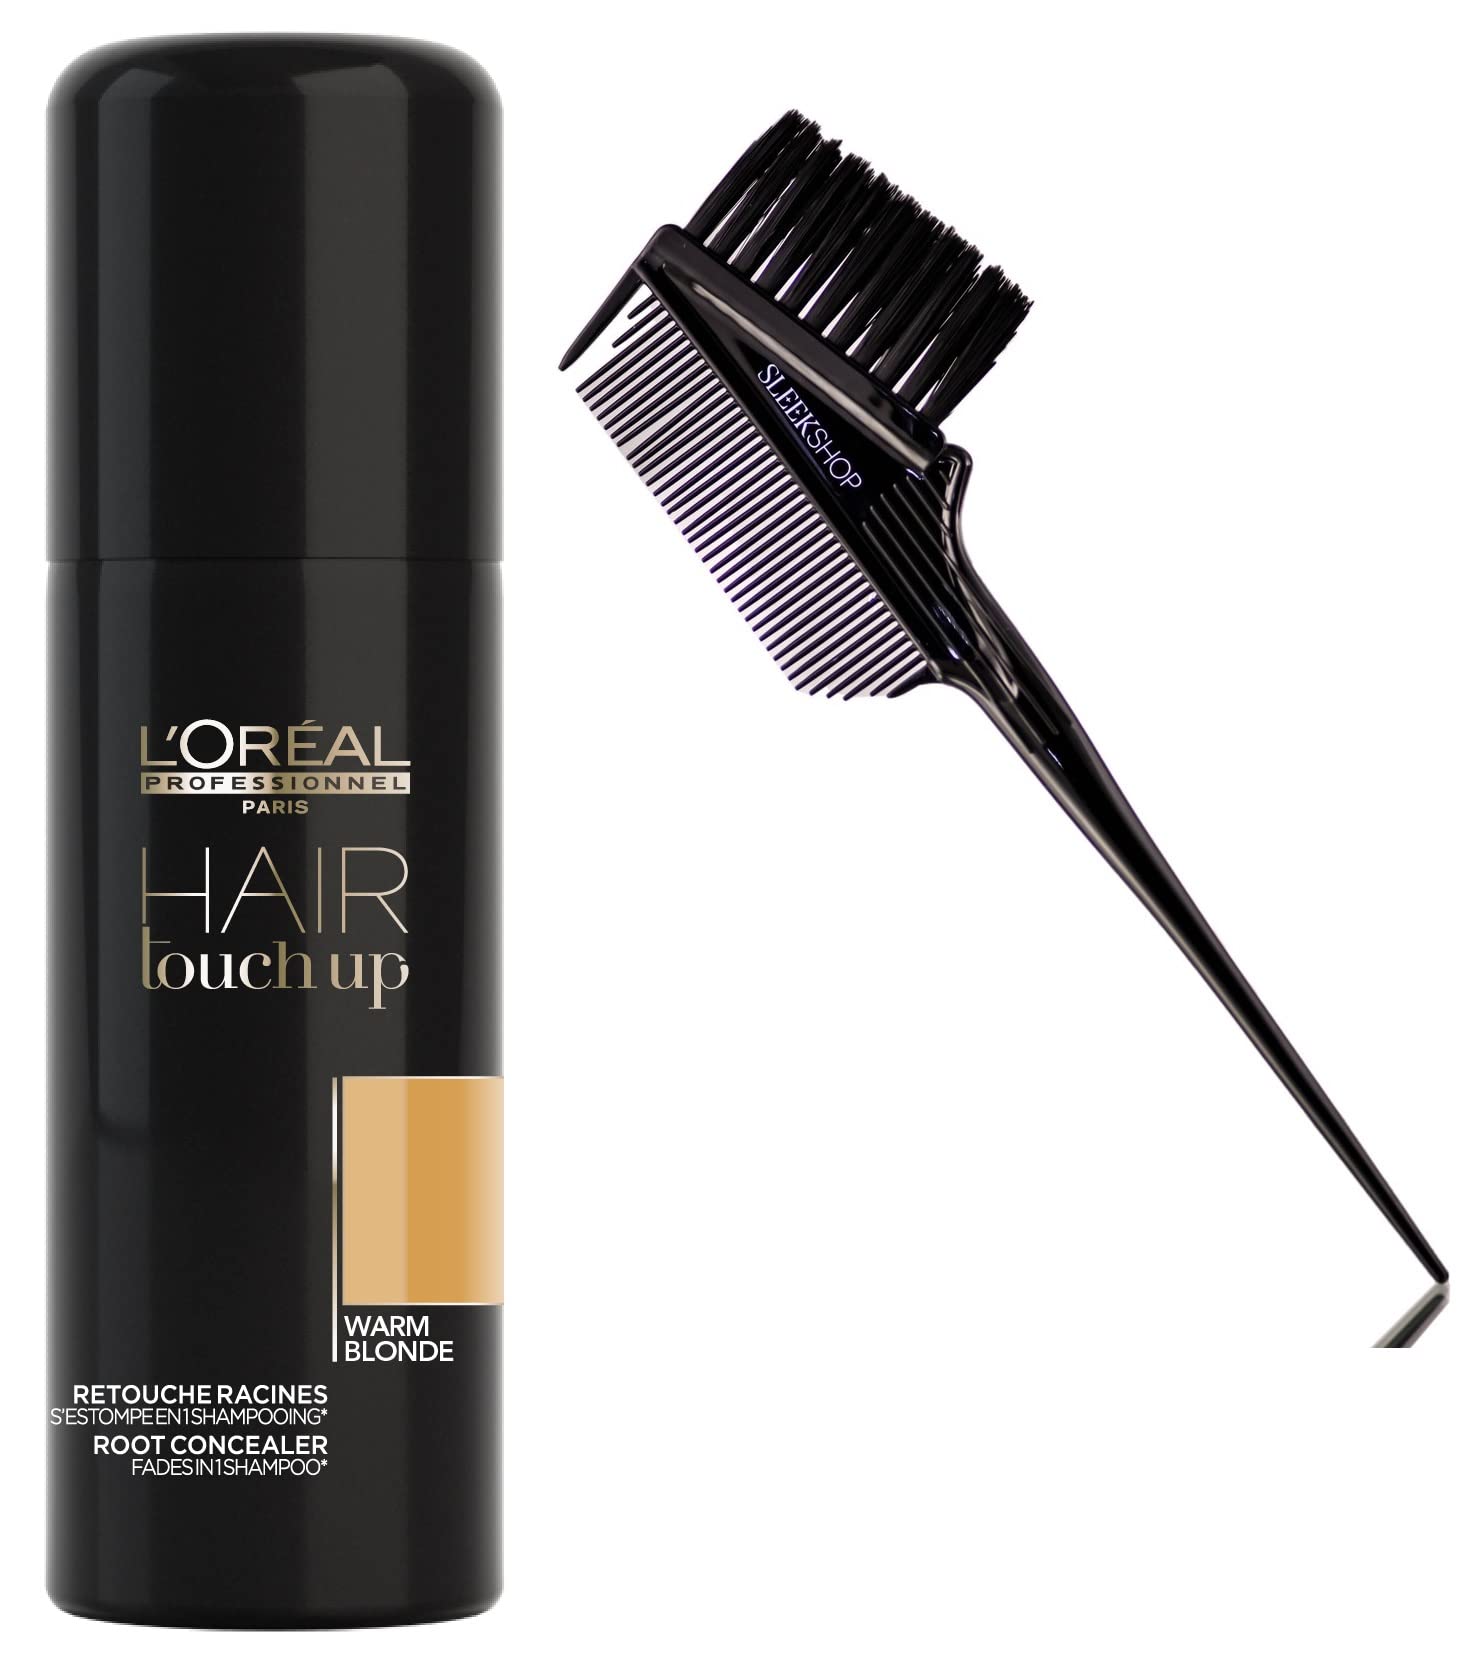 WARM BLONDE , L'oreal Professionnel HAIR TOUCH UP Spray, Root Concealer Aerosol Hair Color Hairspray Loreal Haircolor Dye - Pack of 1 w/ SLEEK 3-in-1 Brush/Comb - image 1 of 1